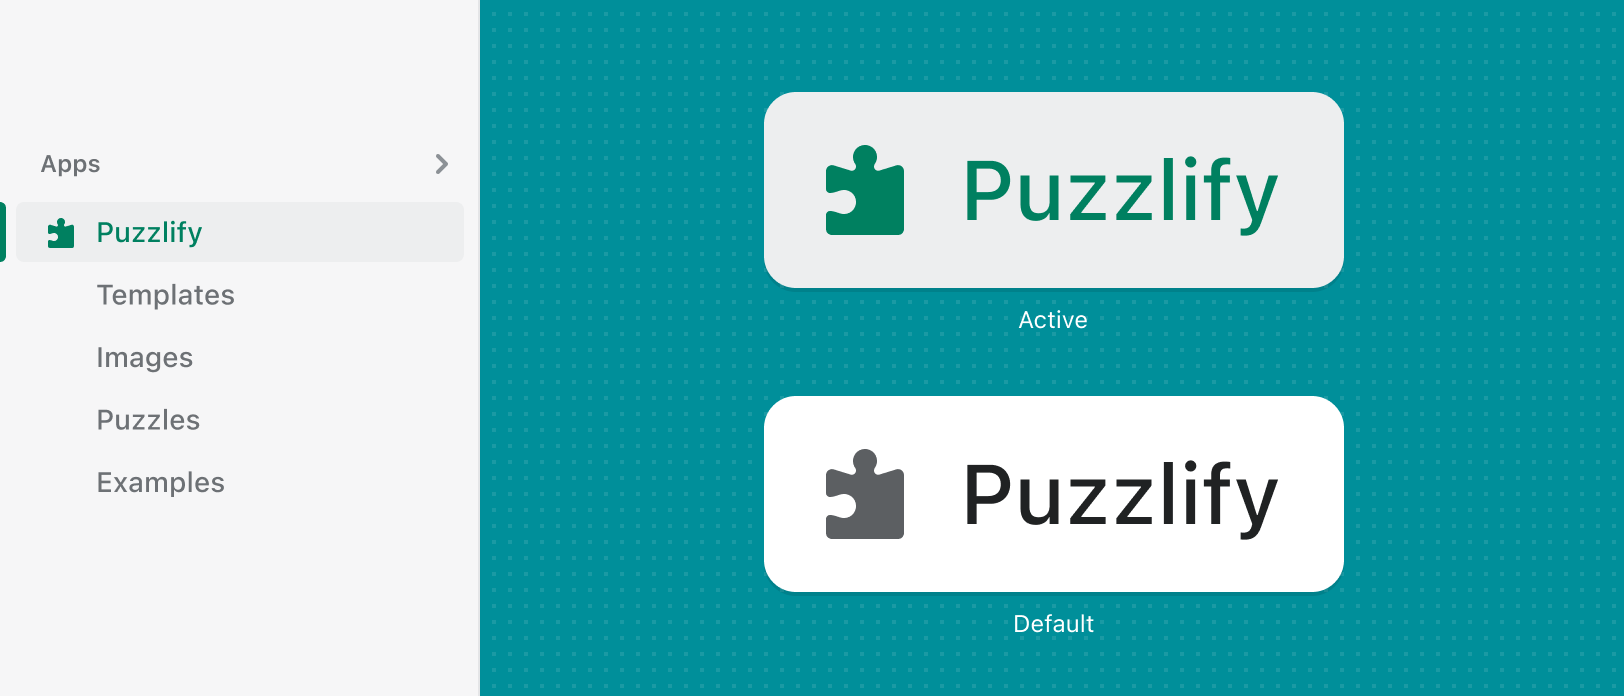 The Puzzlify app icon, in the shape of a jigsaw puzzle piece, being shown on white and gray backgrounds, in an active and default interactive state.